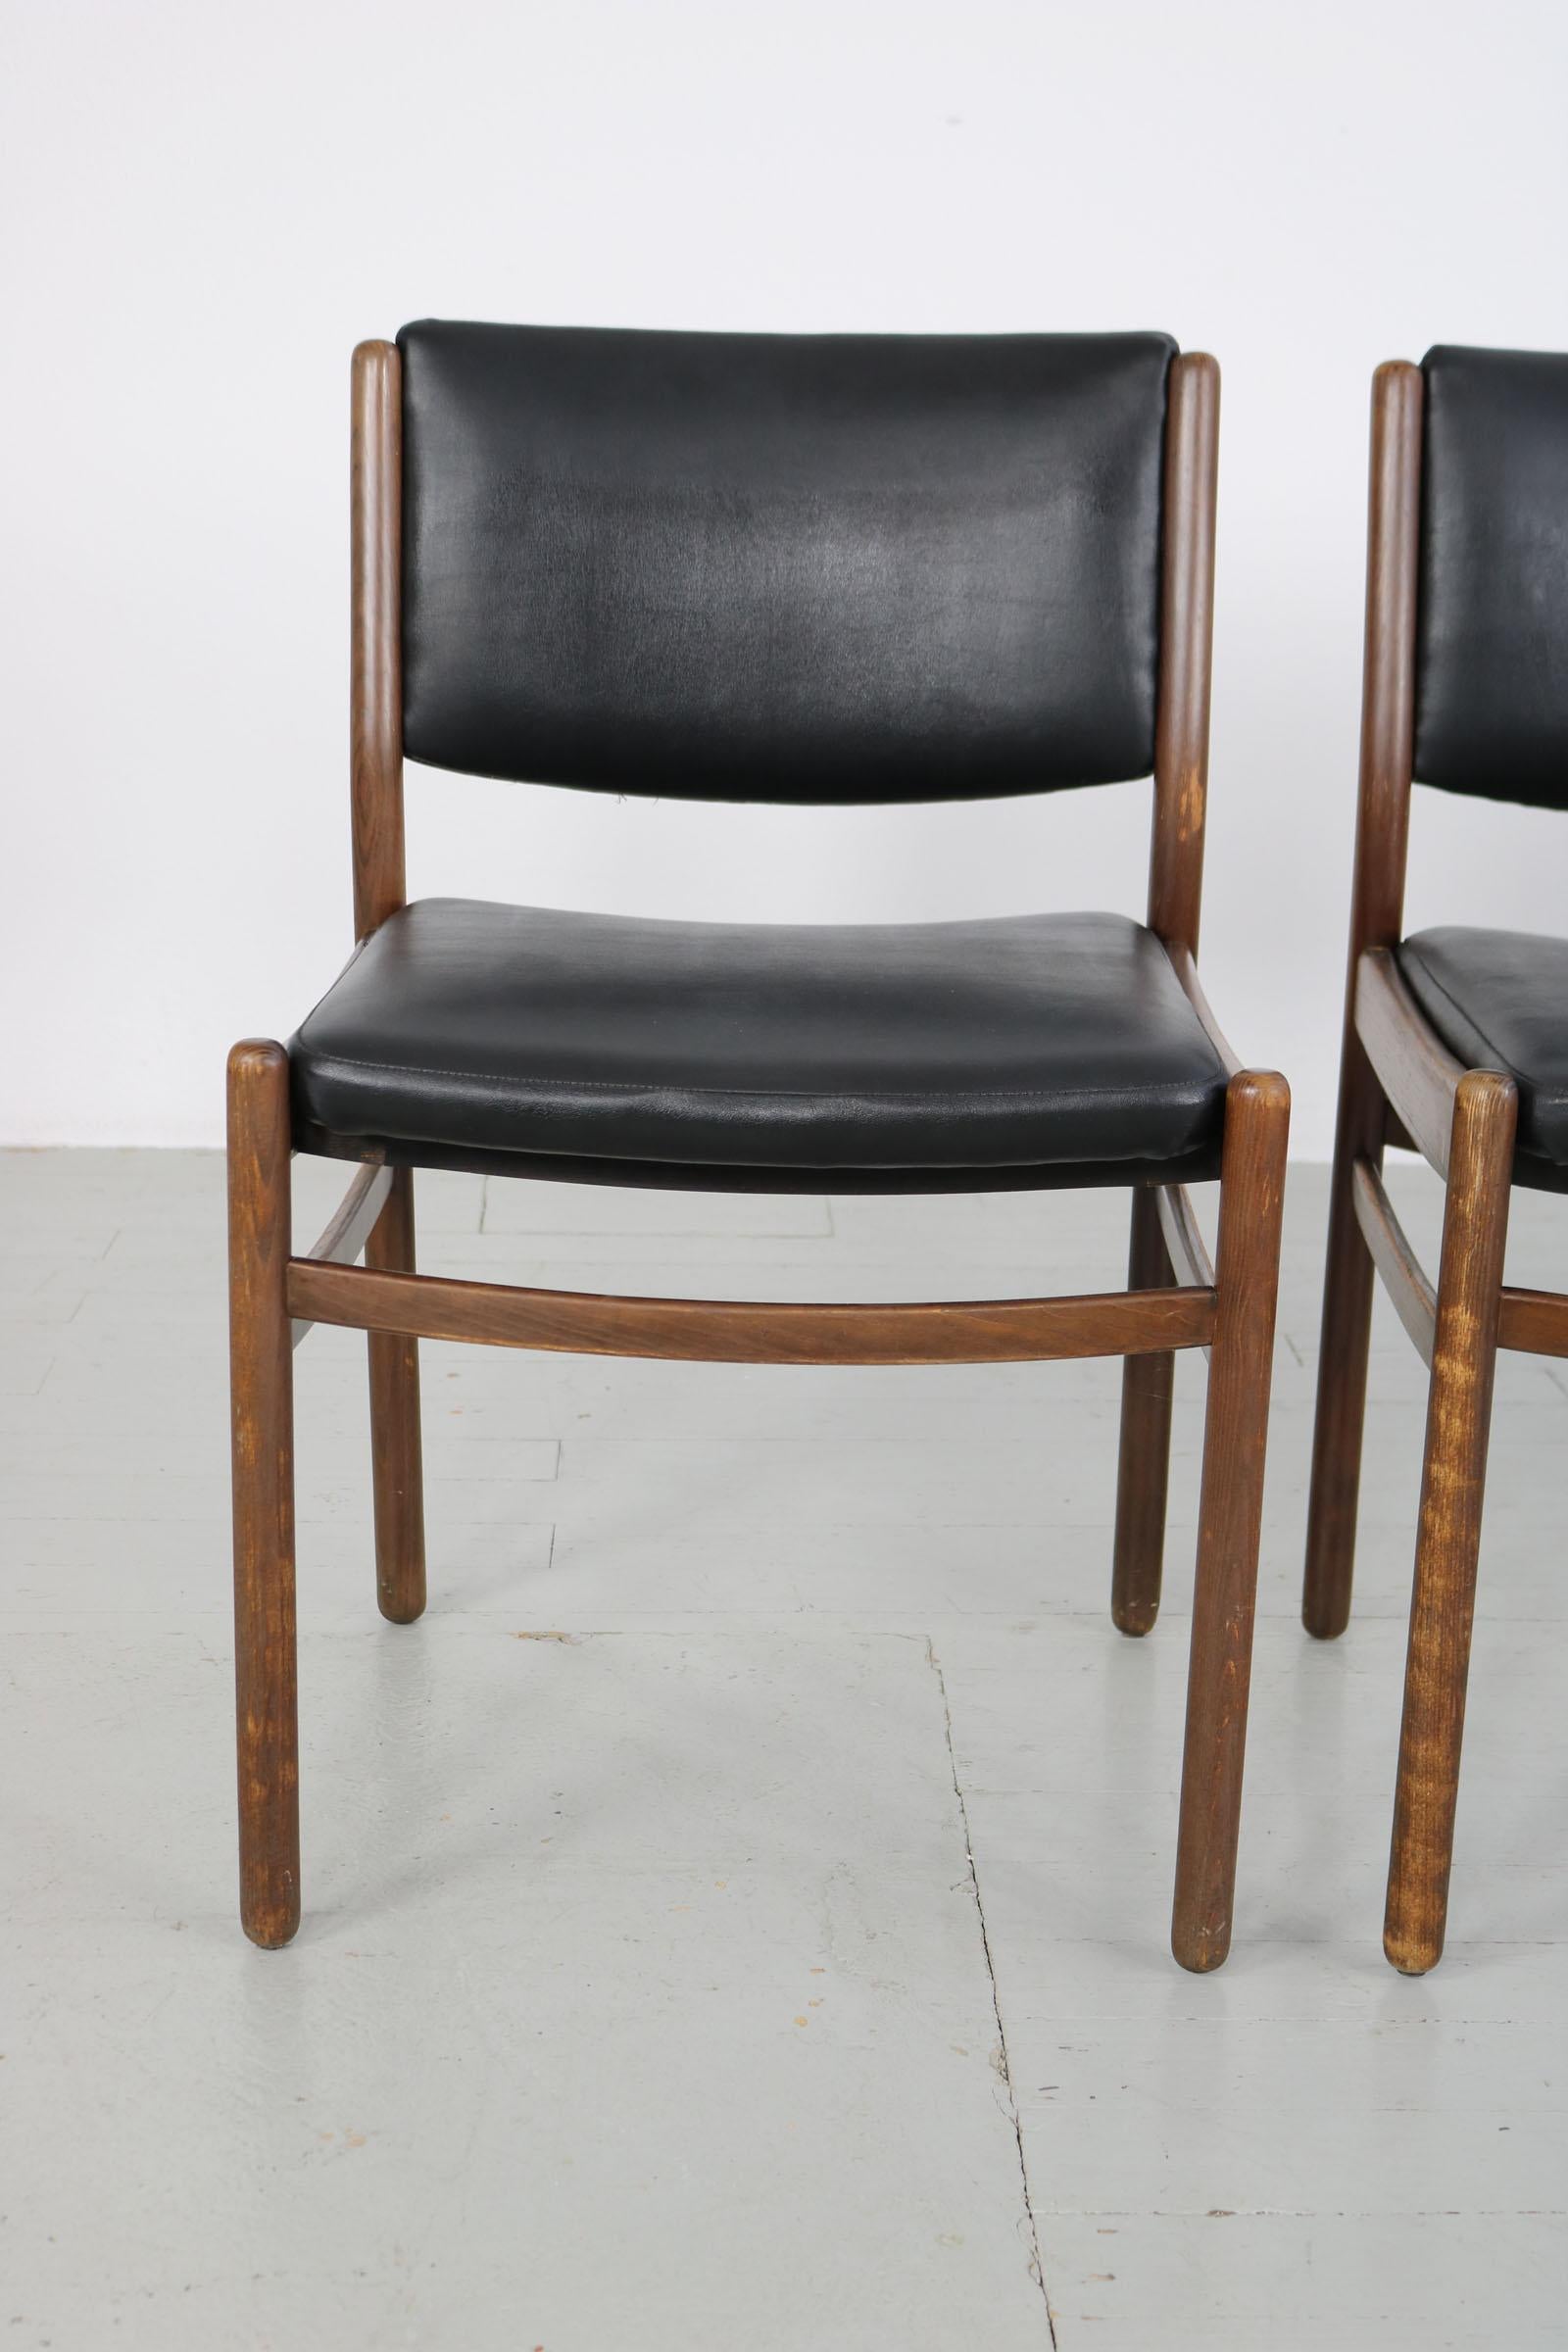 Set of Three Wooden Chairs with Black Leatherette Upholstery, Italy 60s For Sale 2